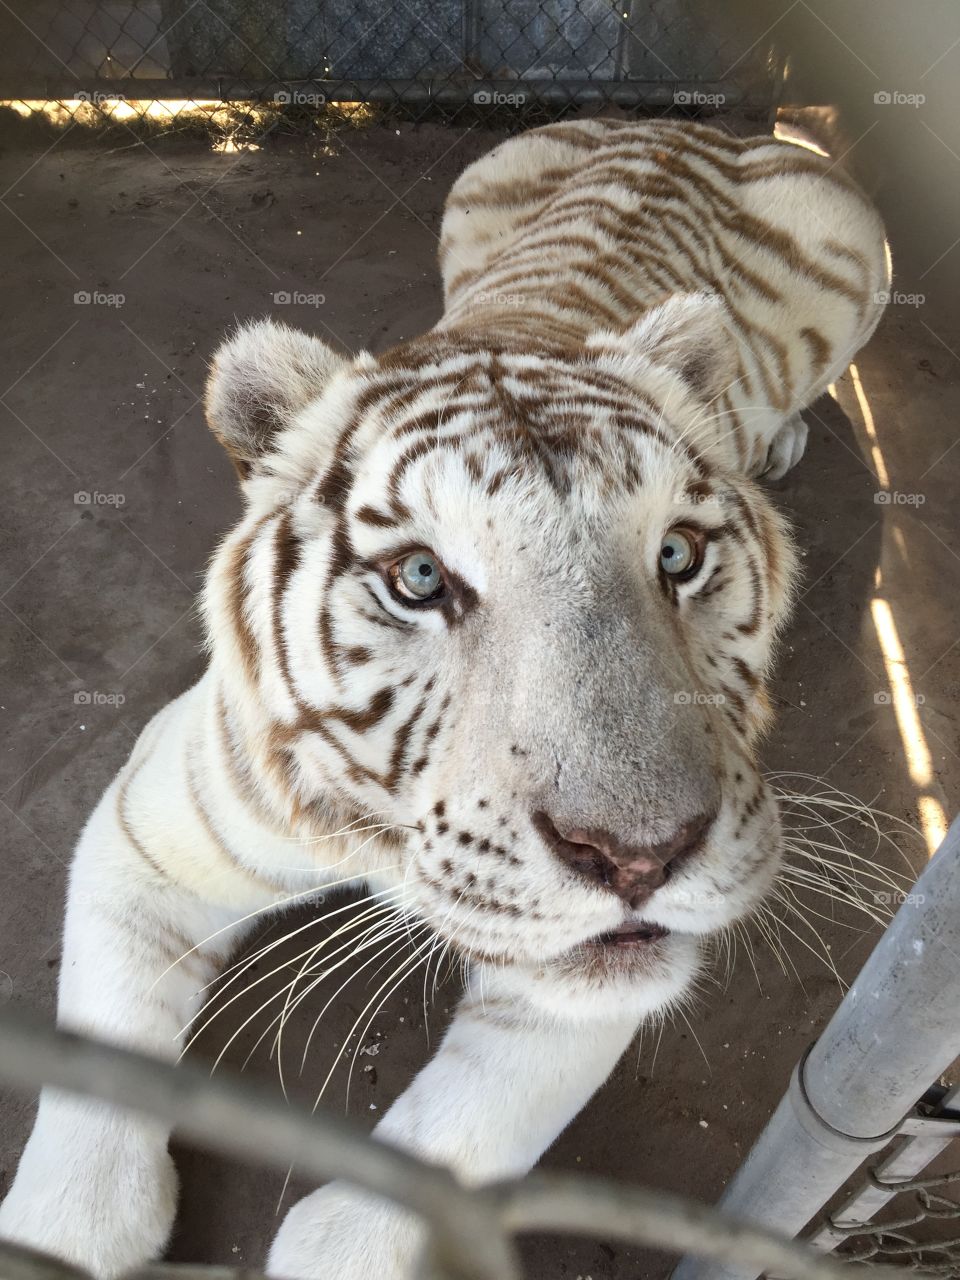 White tiger at a sanctuary I worked at. His name is Lil Al. 